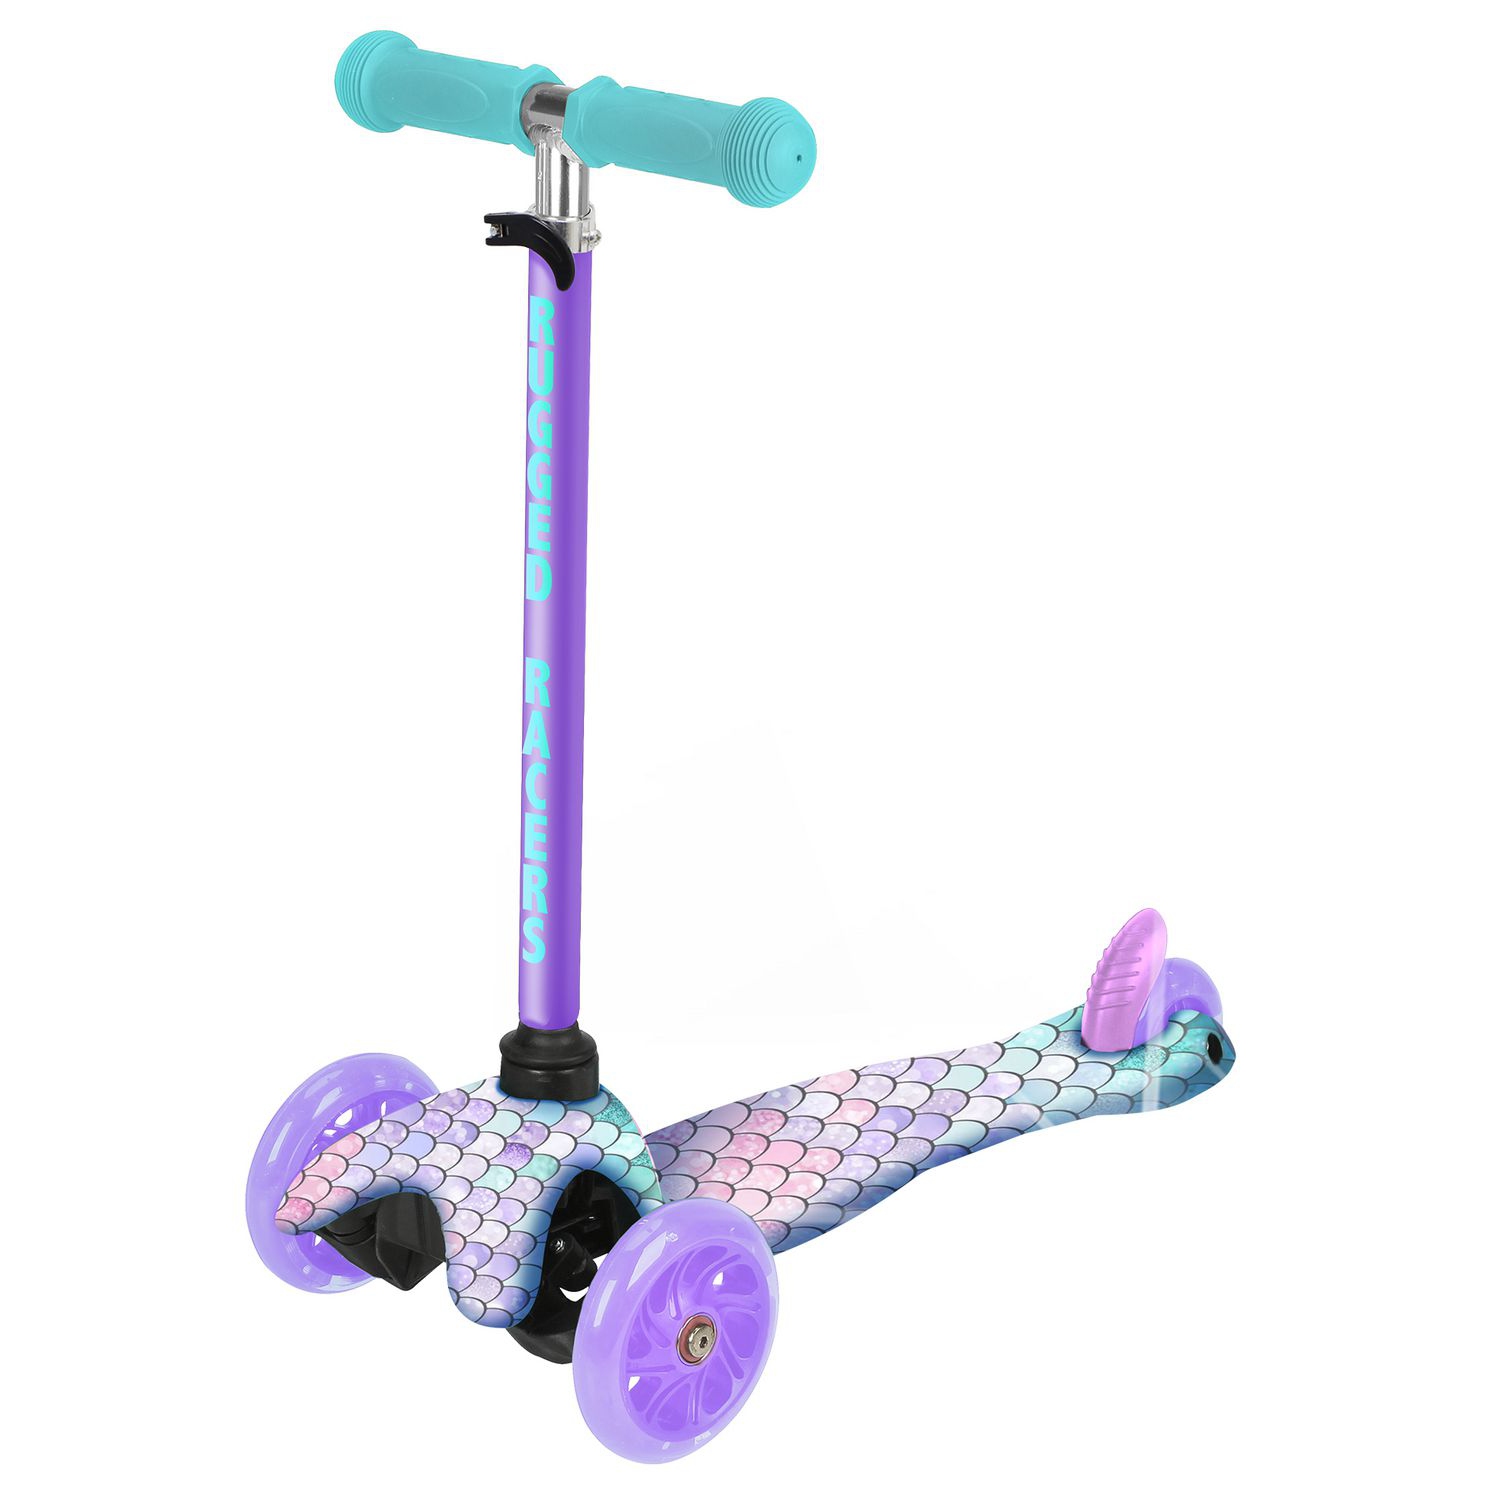 Rugged Racer Mini Deluxe 3 Wheel Scooter With LED Lights, Mermaid Design